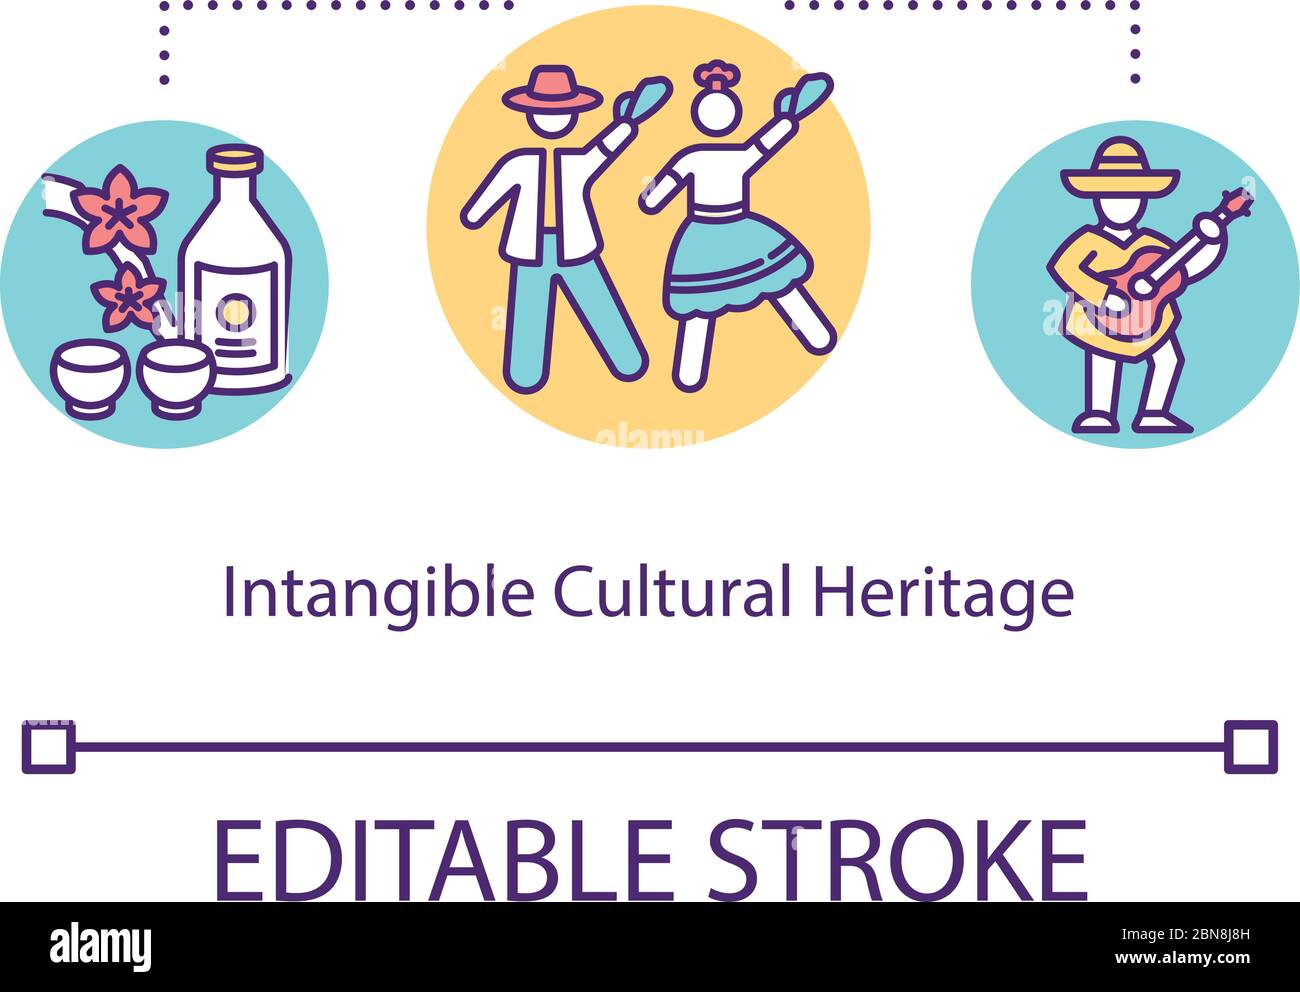 Intangible cultural heritage concept icon Stock Vector